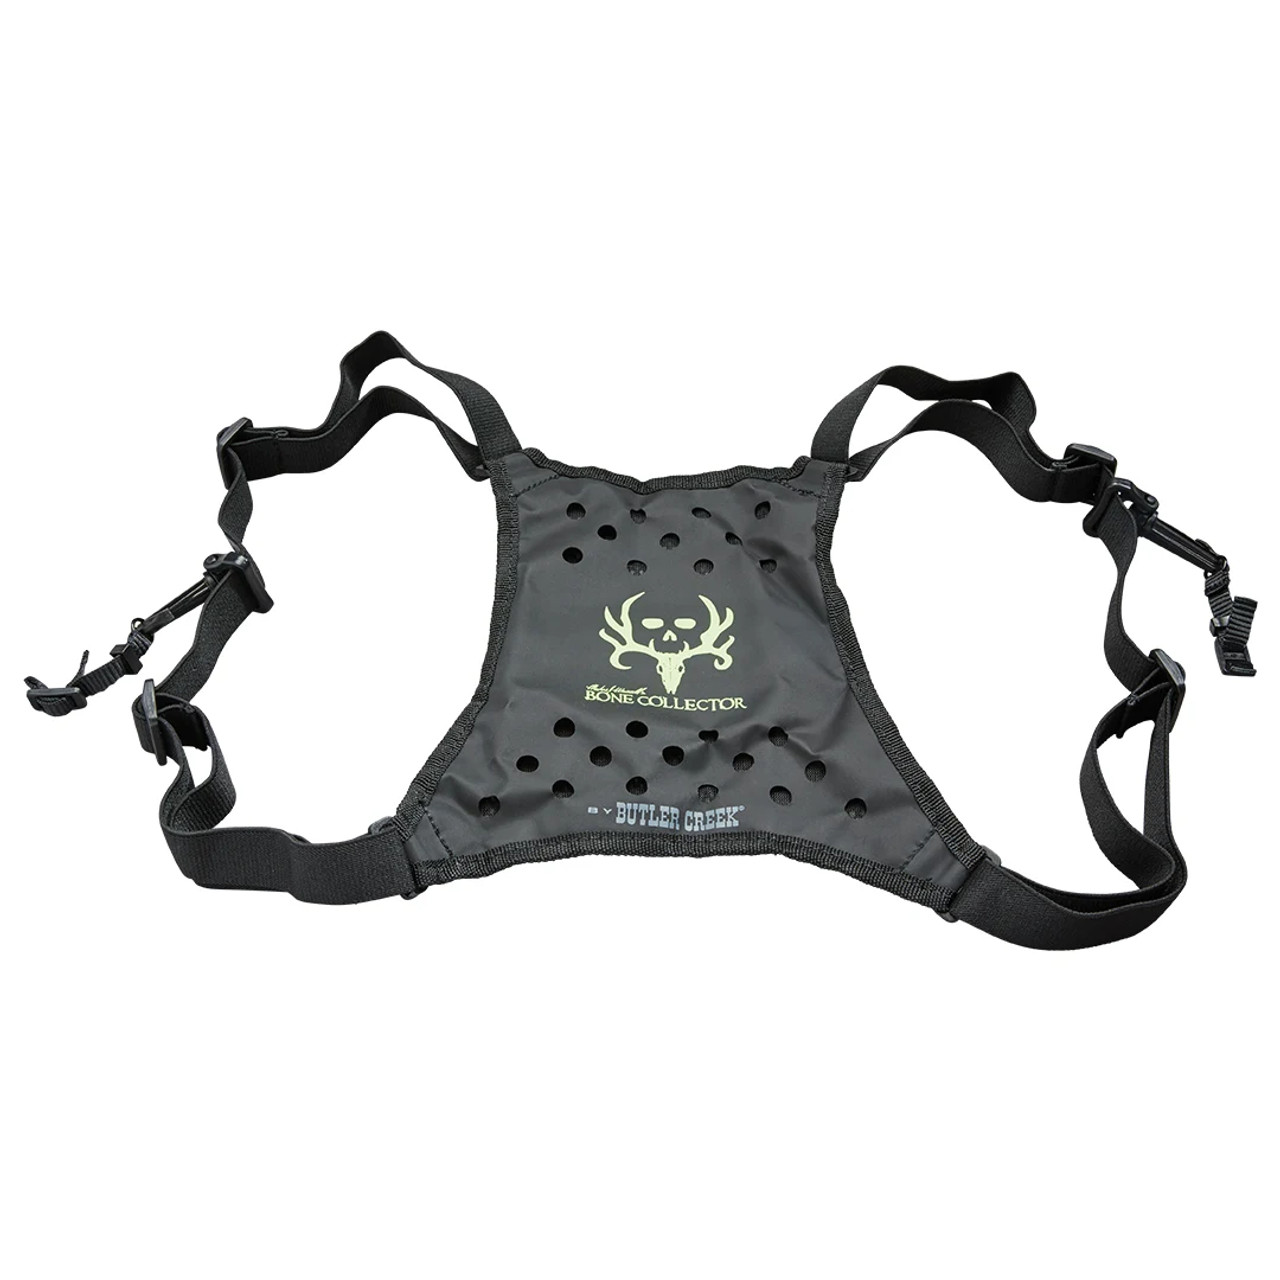 https://cdn11.bigcommerce.com/s-yblk85/images/stencil/1280x1280/products/872/3523/Bone_Collector_Deluxe_Bino_Harness_Black_Clam__49557.1697738629.jpg?c=2